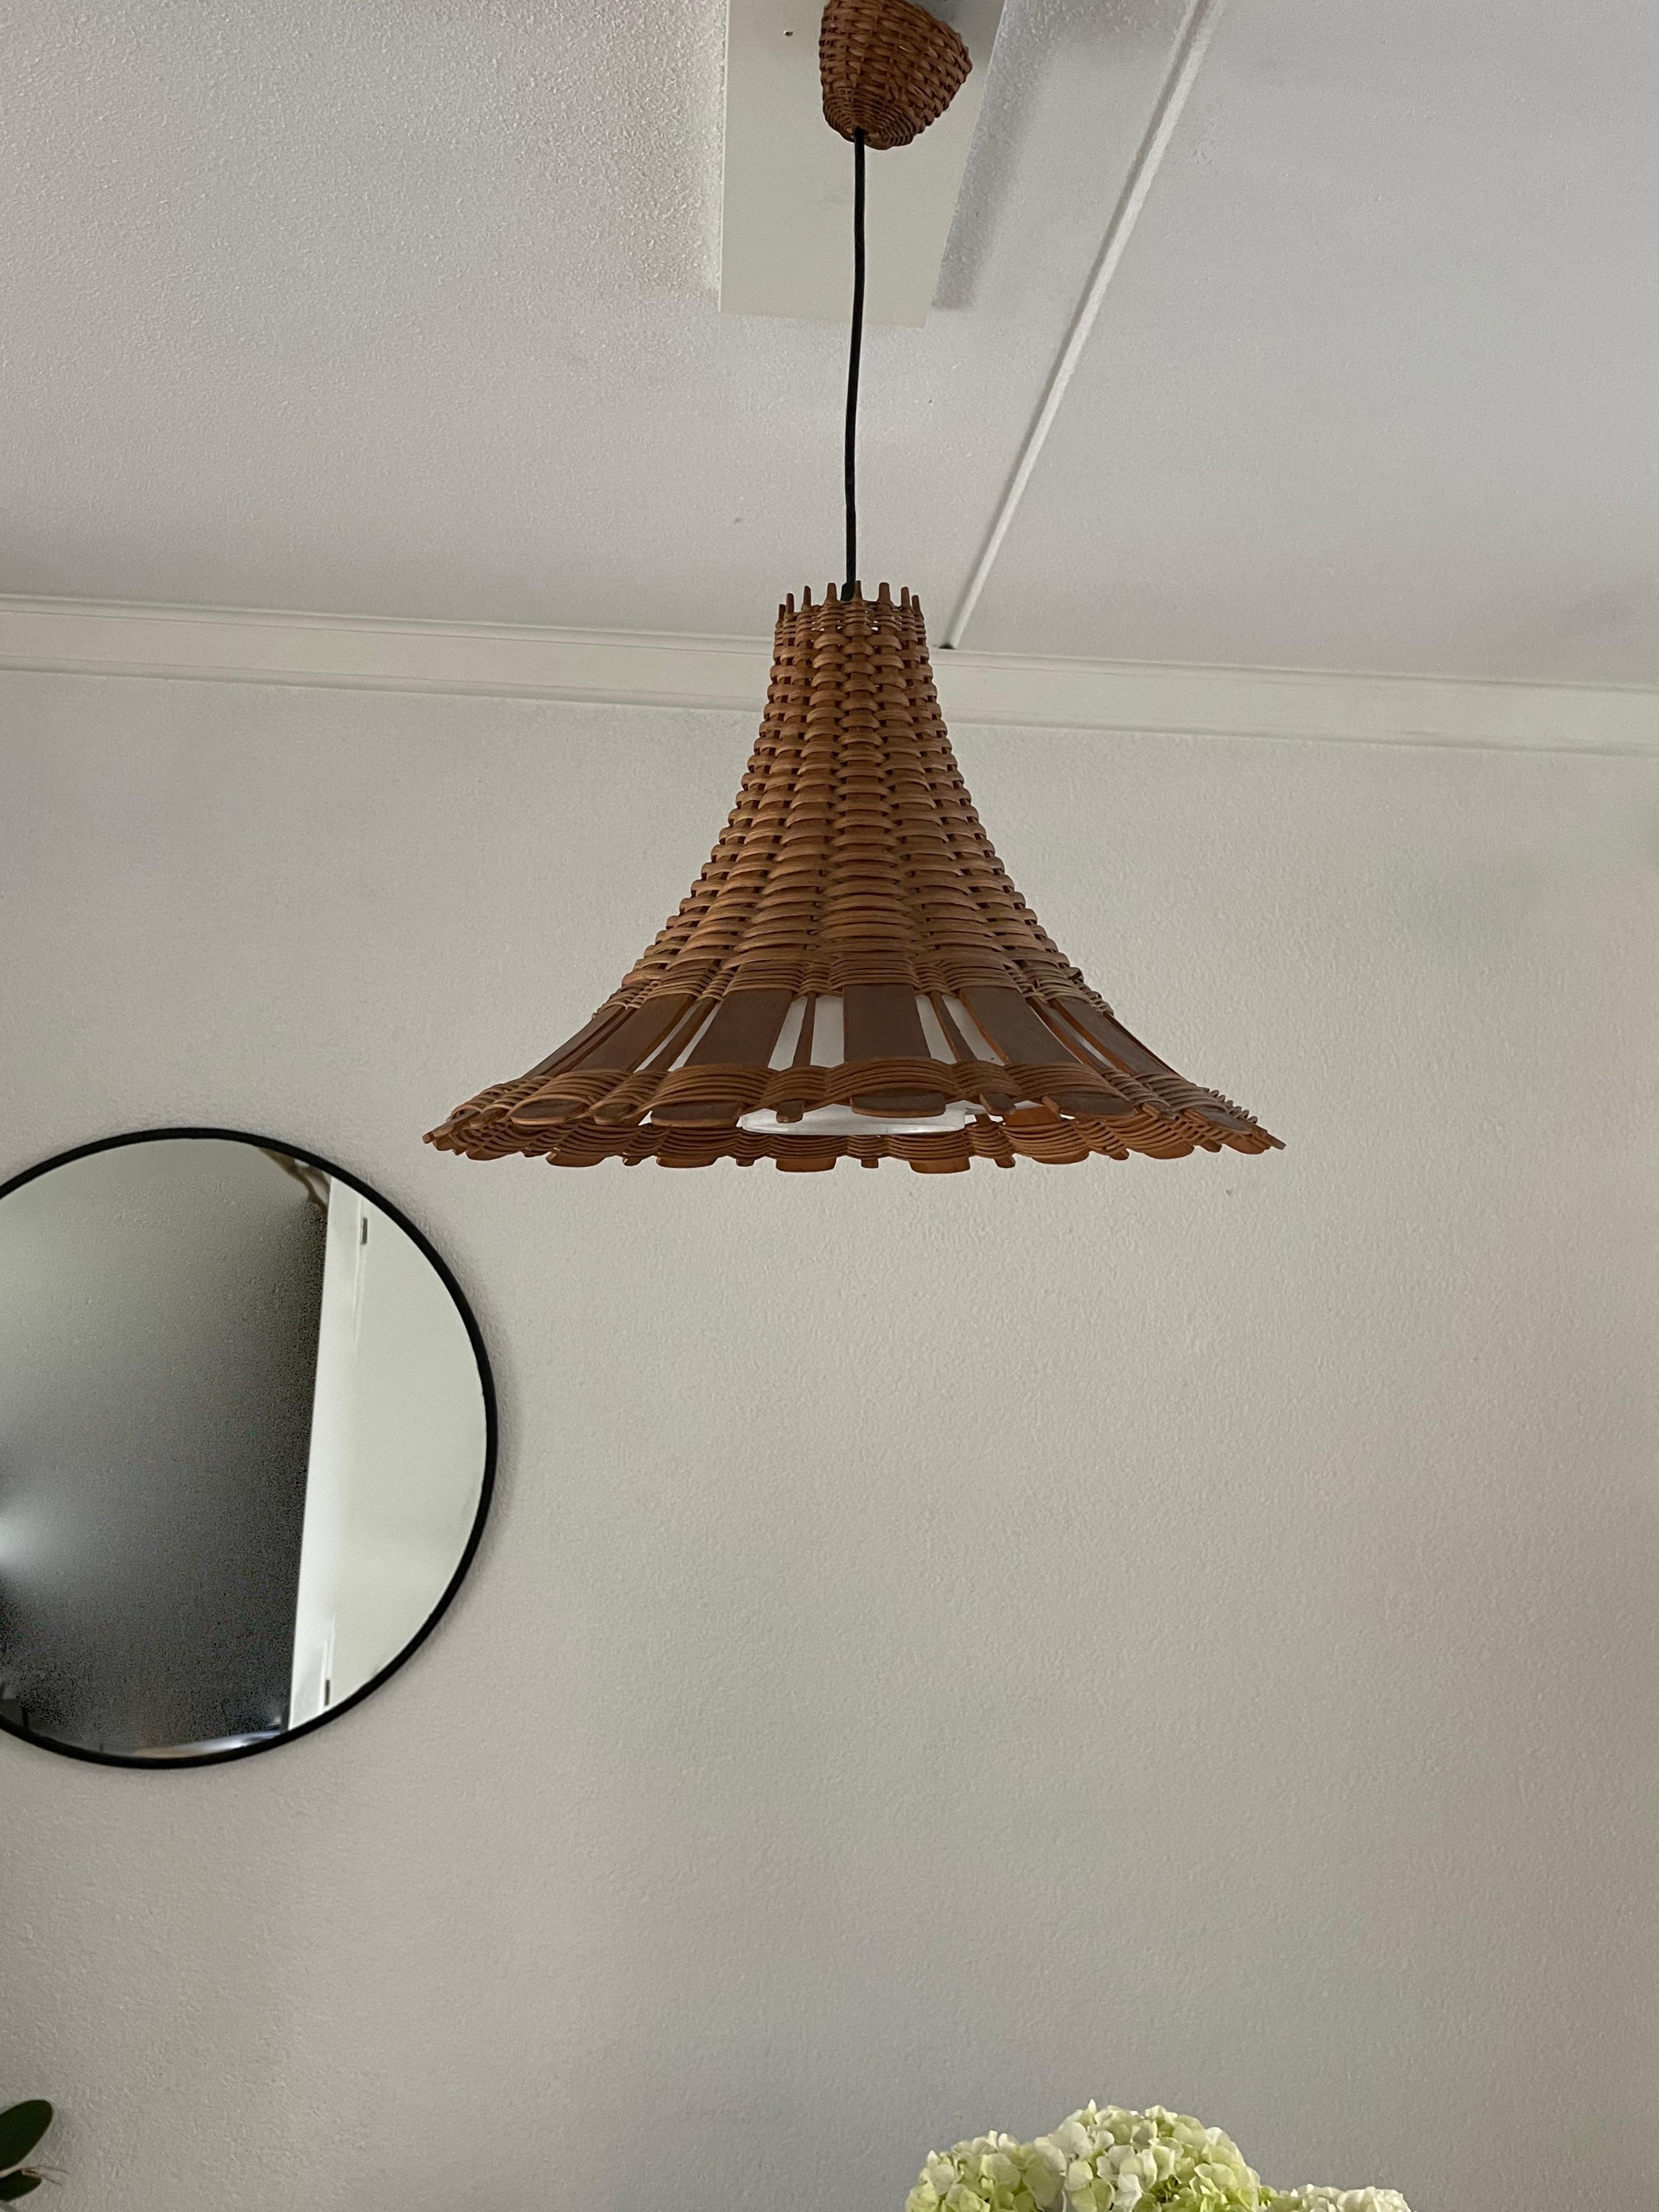 Wonderfully stylish and beautifully crafted, midcentury pendant.

This 1960s pendant is perfect for bringing light to your midcentury, but also to your modern day kitchen table, living room, writing table etc. This fixture is made of a beautifully